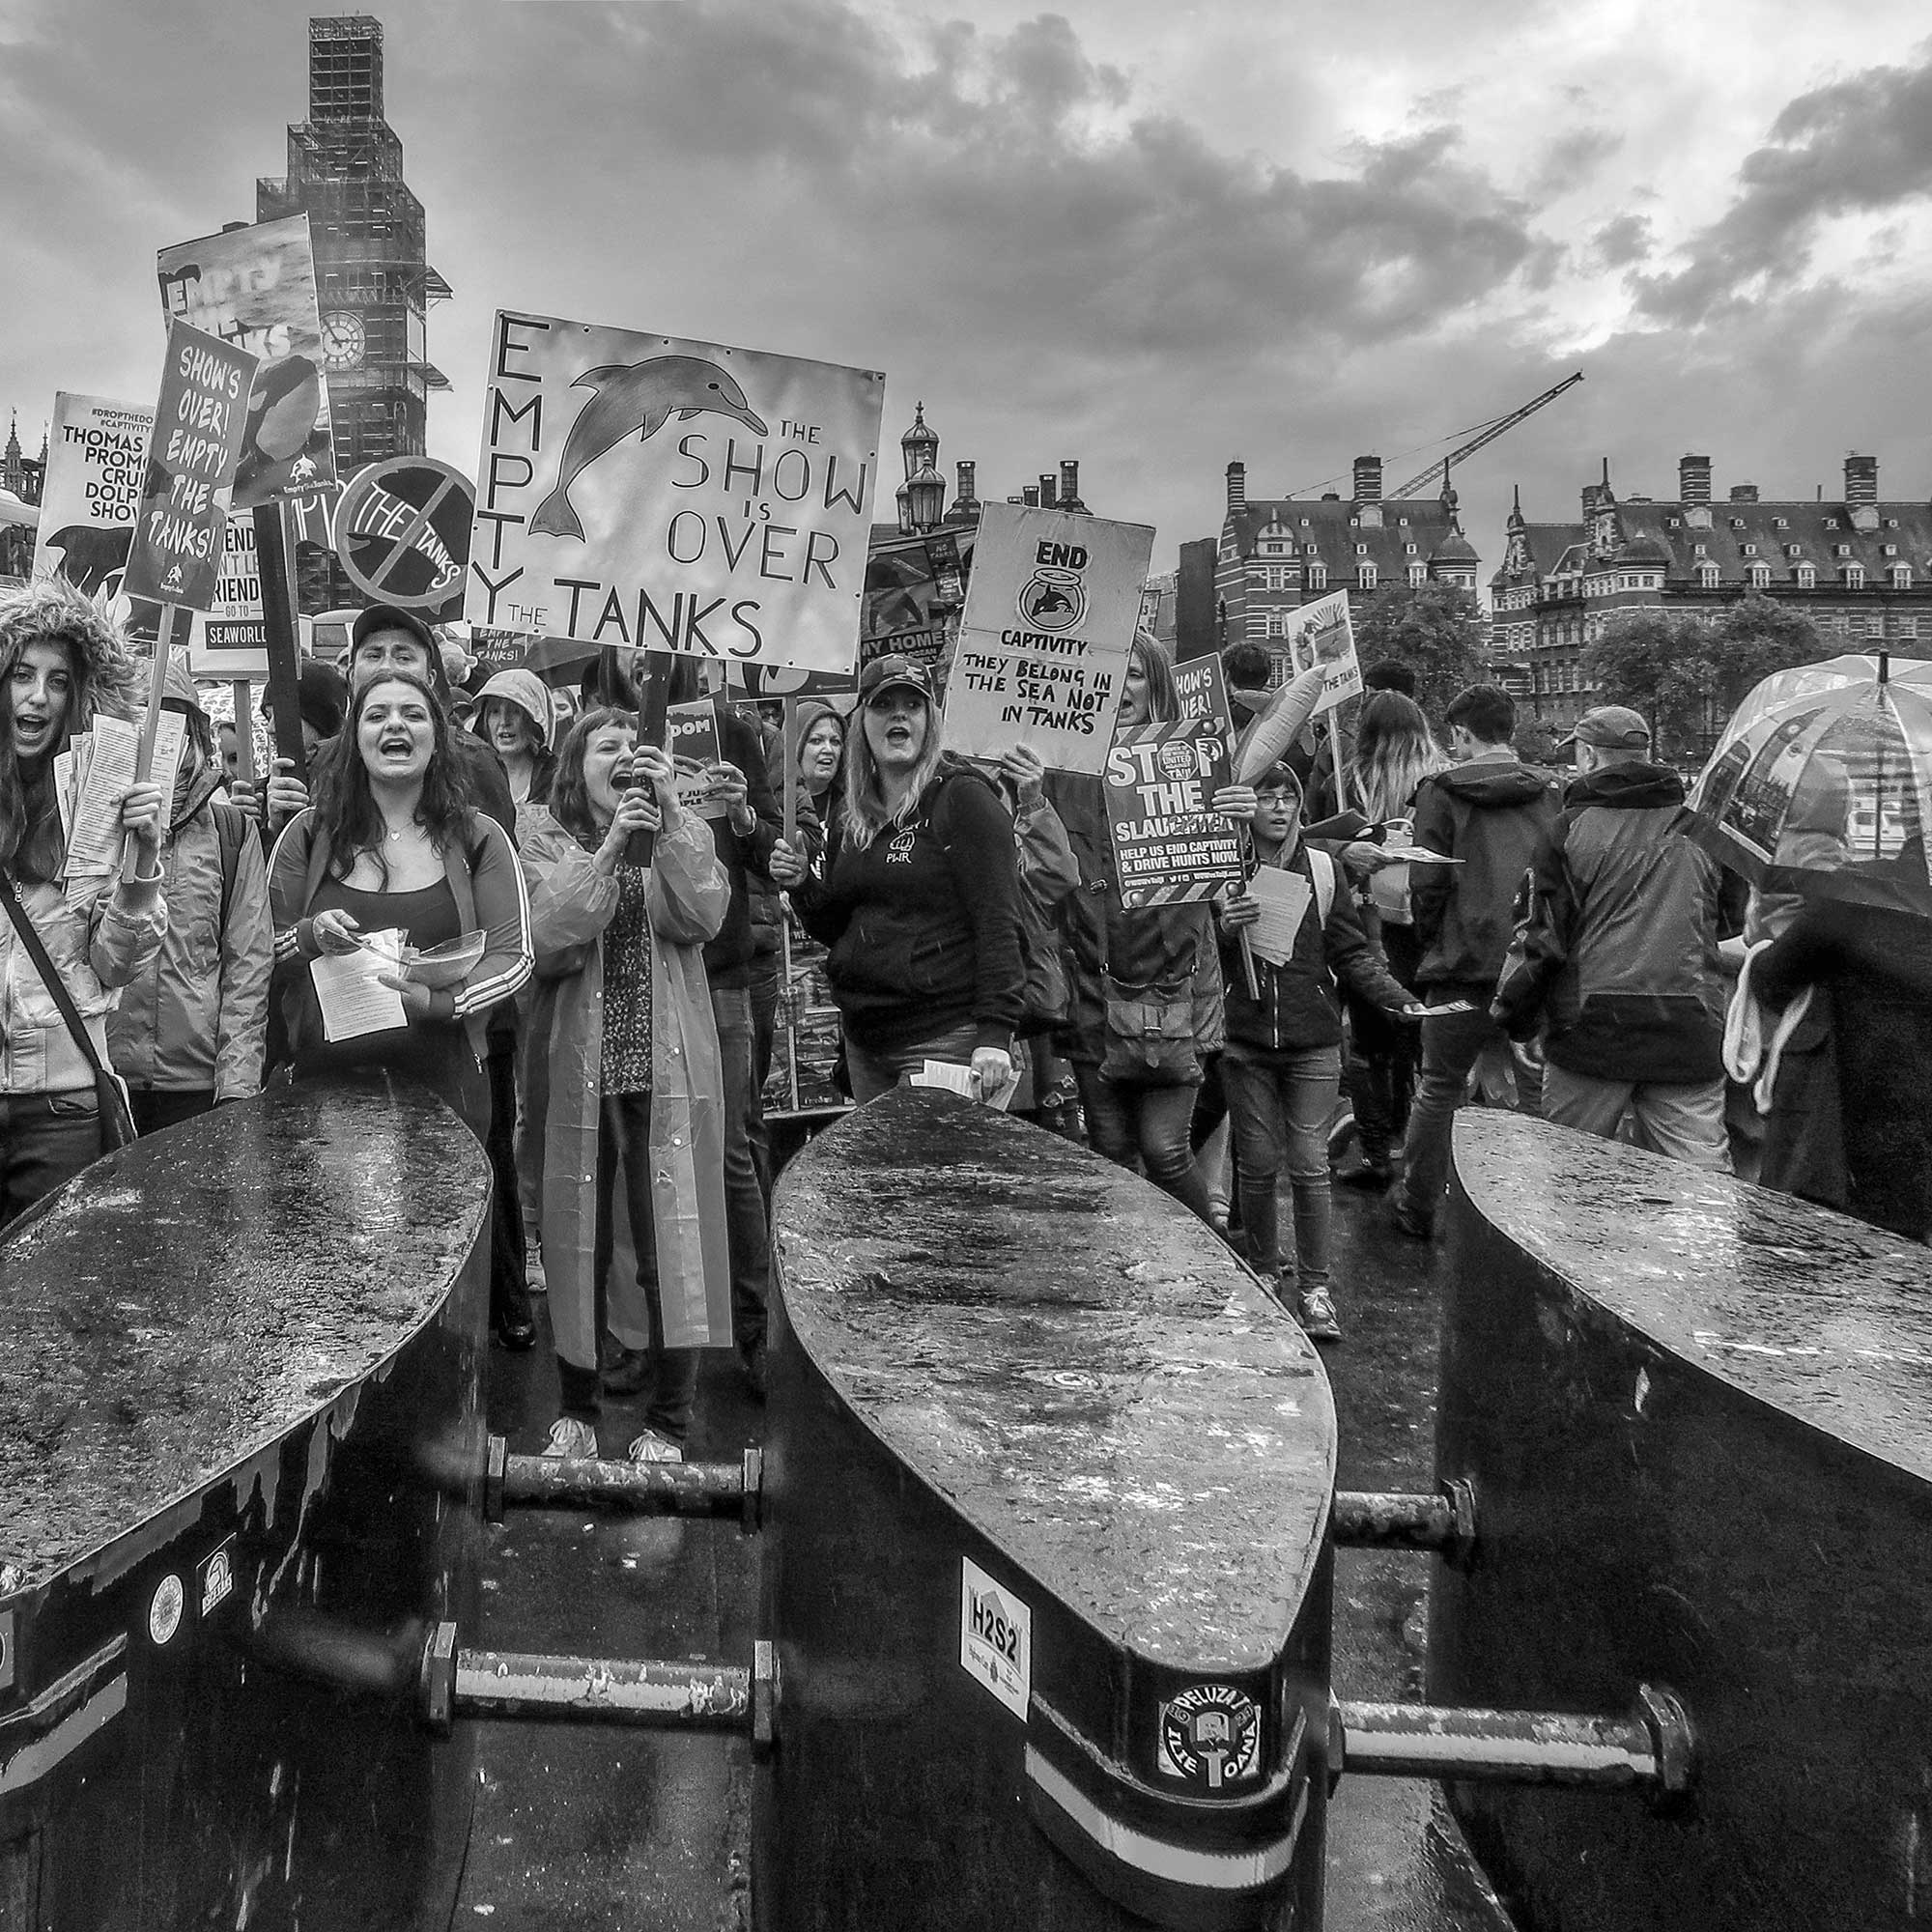 6th Annual Empty The Tanks – London